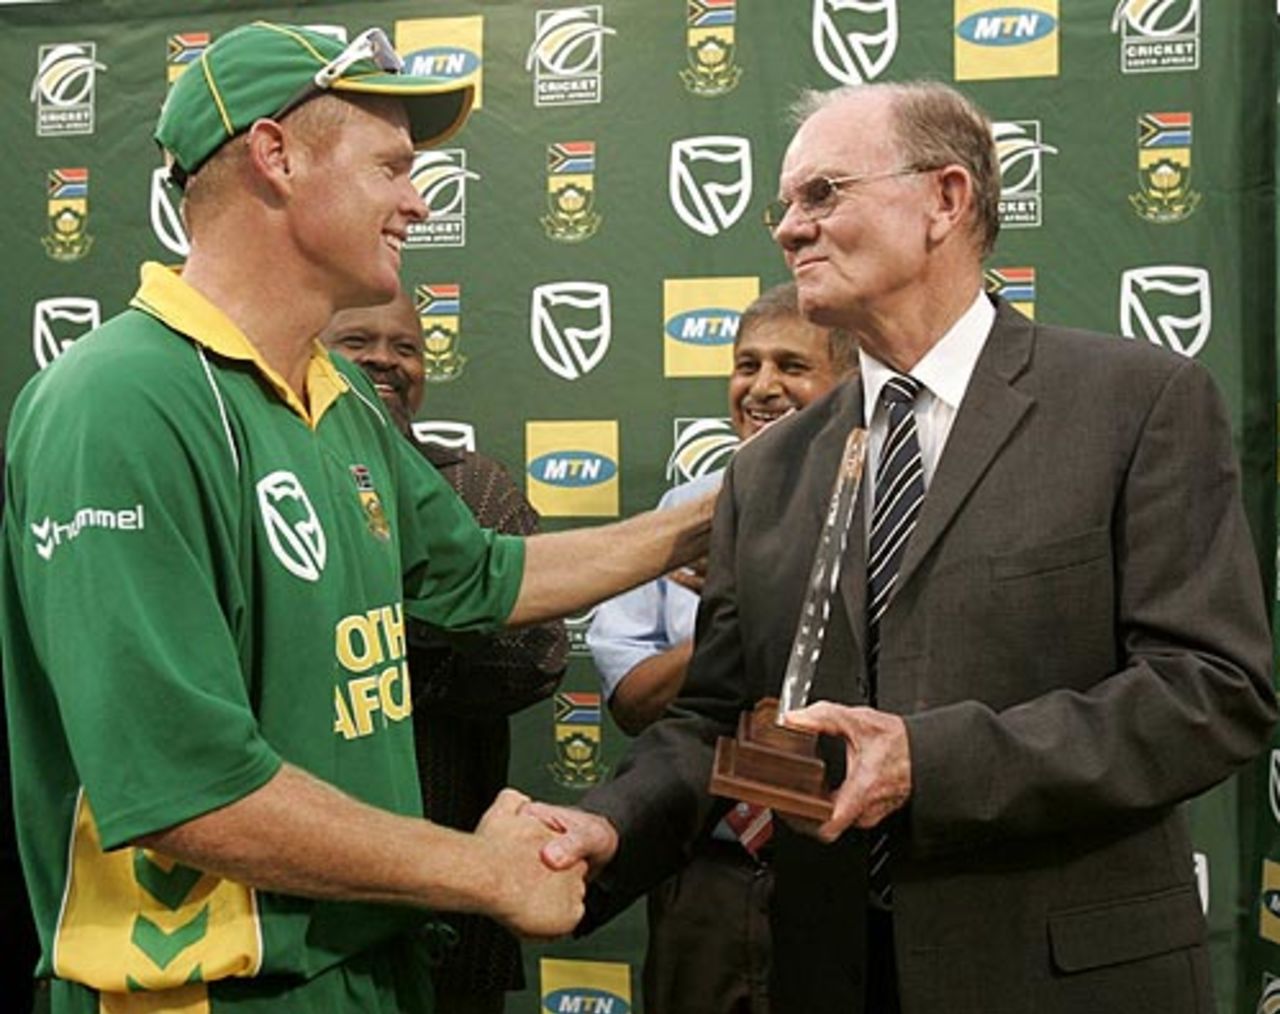 Shaun Pollock receives a memento from his father Peter during his final ODI appearance at home ground Kingsmead, South Africa v West Indies, 4th ODI, Durban, February 1, 2008